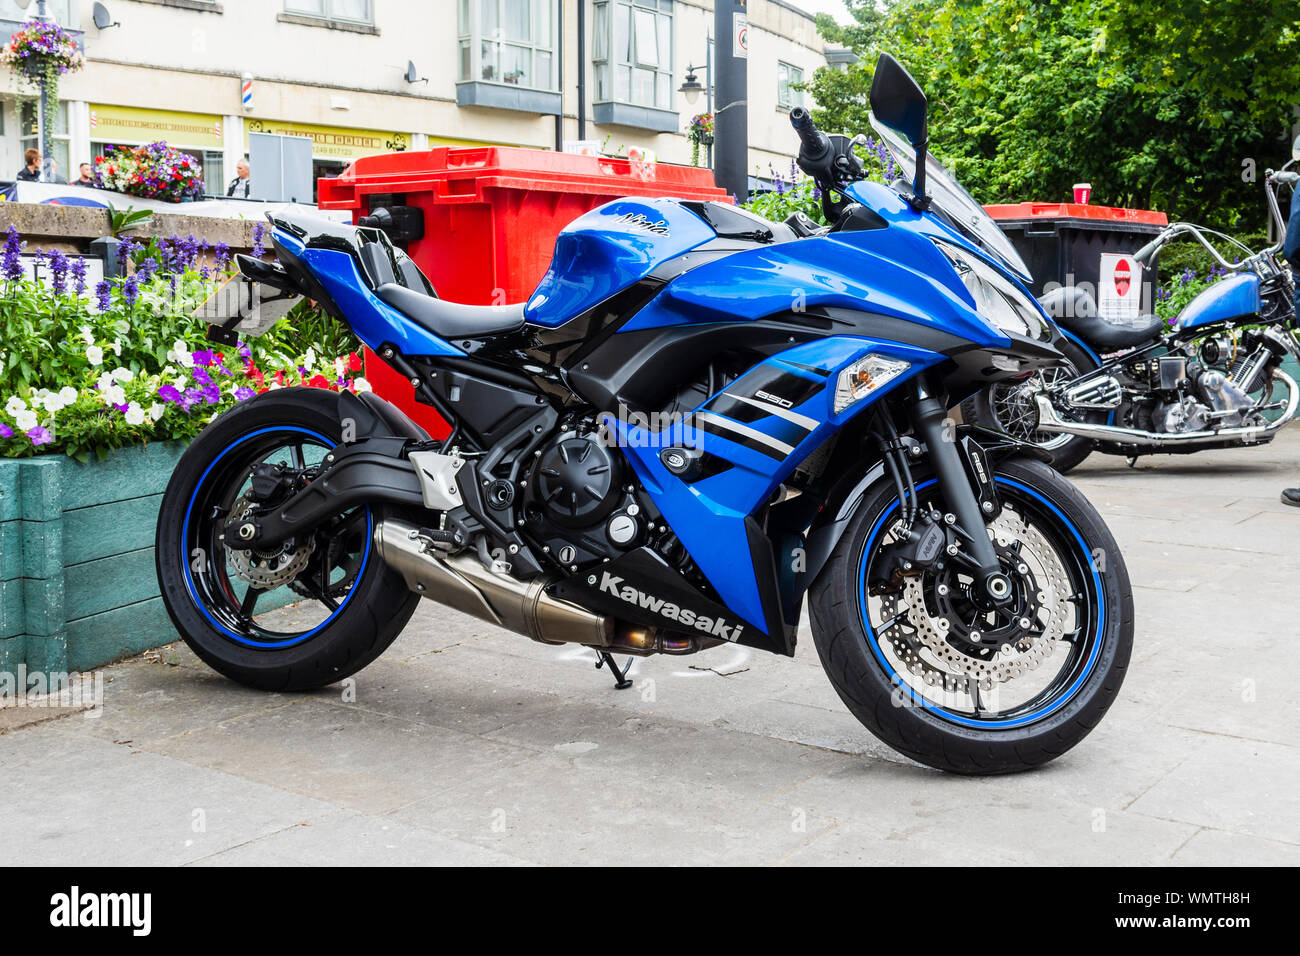 650 cc Kawasaki Ninja motorcycle in blue parked in front of a street flower display during the 2019 Calne Bike meet Stock Photo